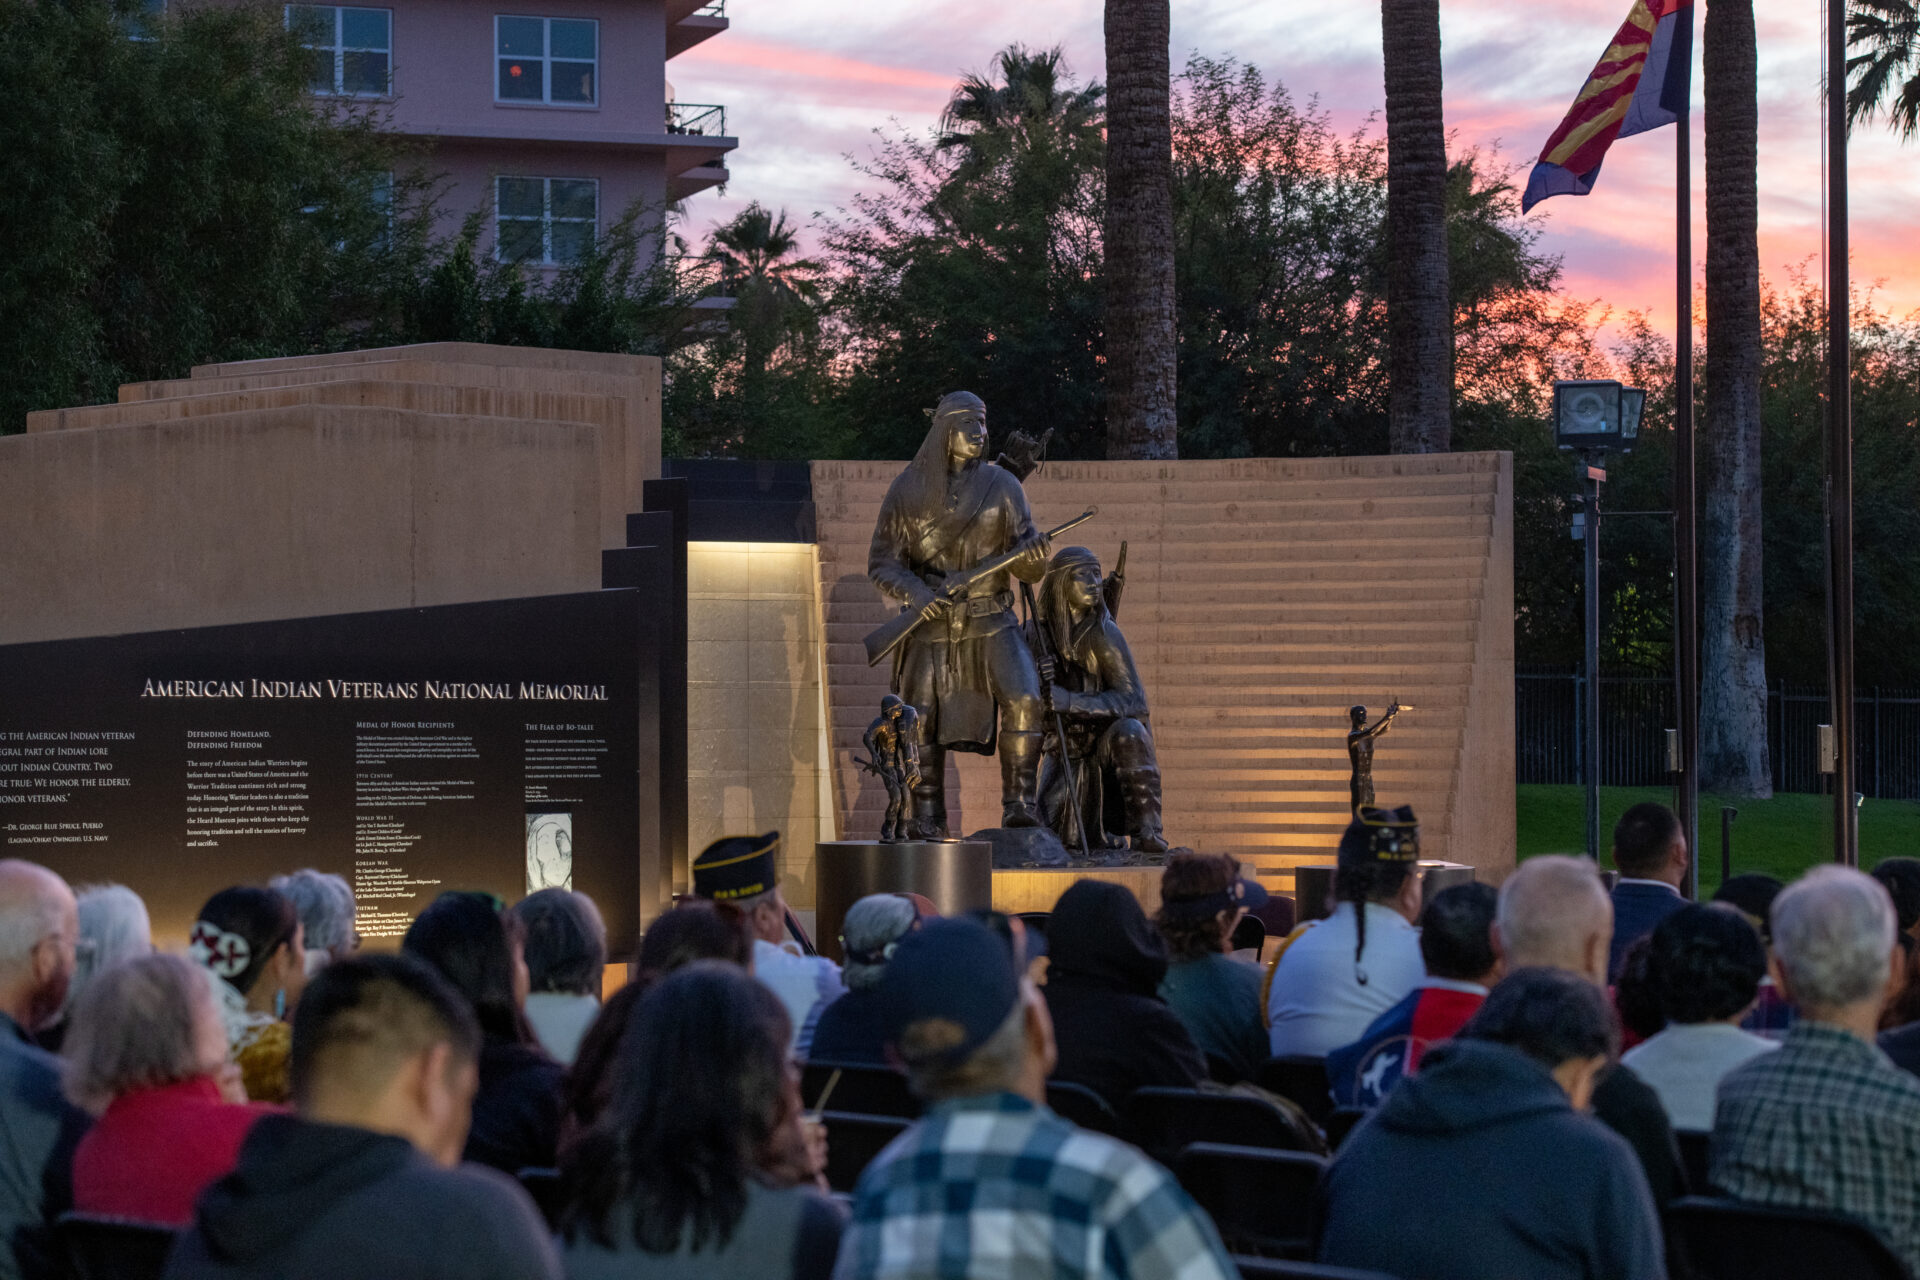 A sculpture of the American Indians Veterans National Memorial at dusk during a crowded event.